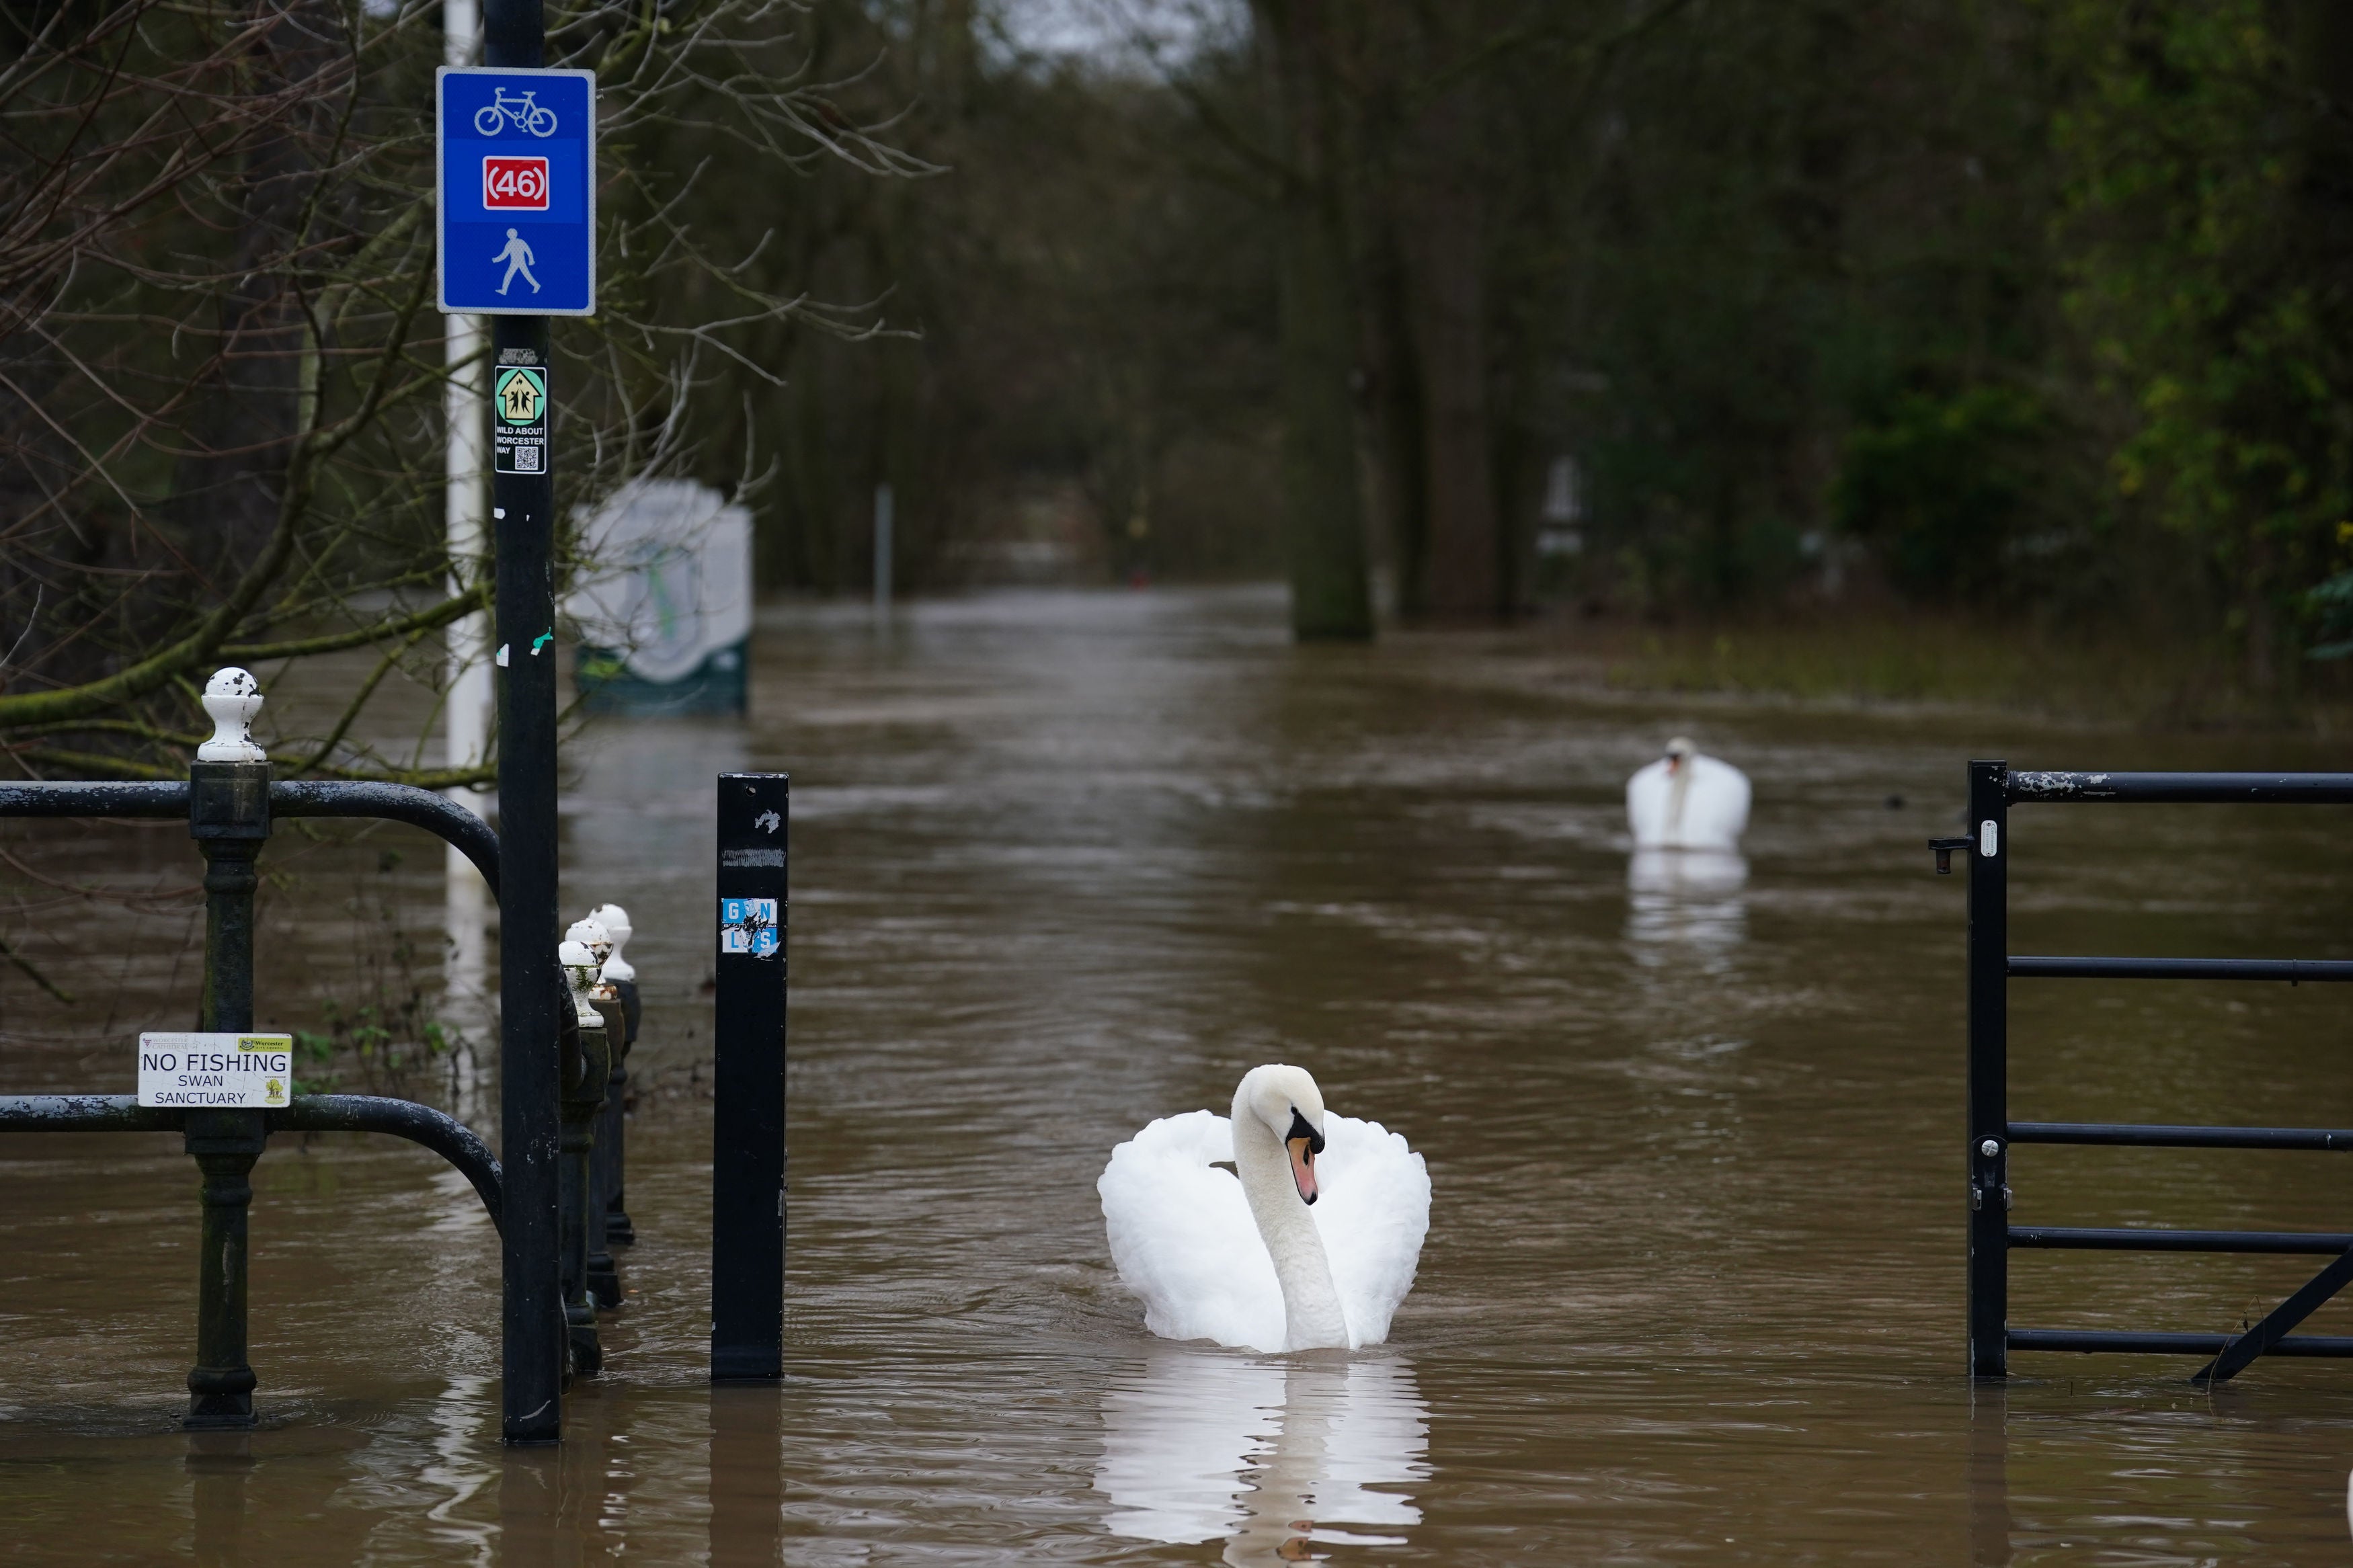 Swans swimming on flood water in Worcester, following heavy rainfall. T